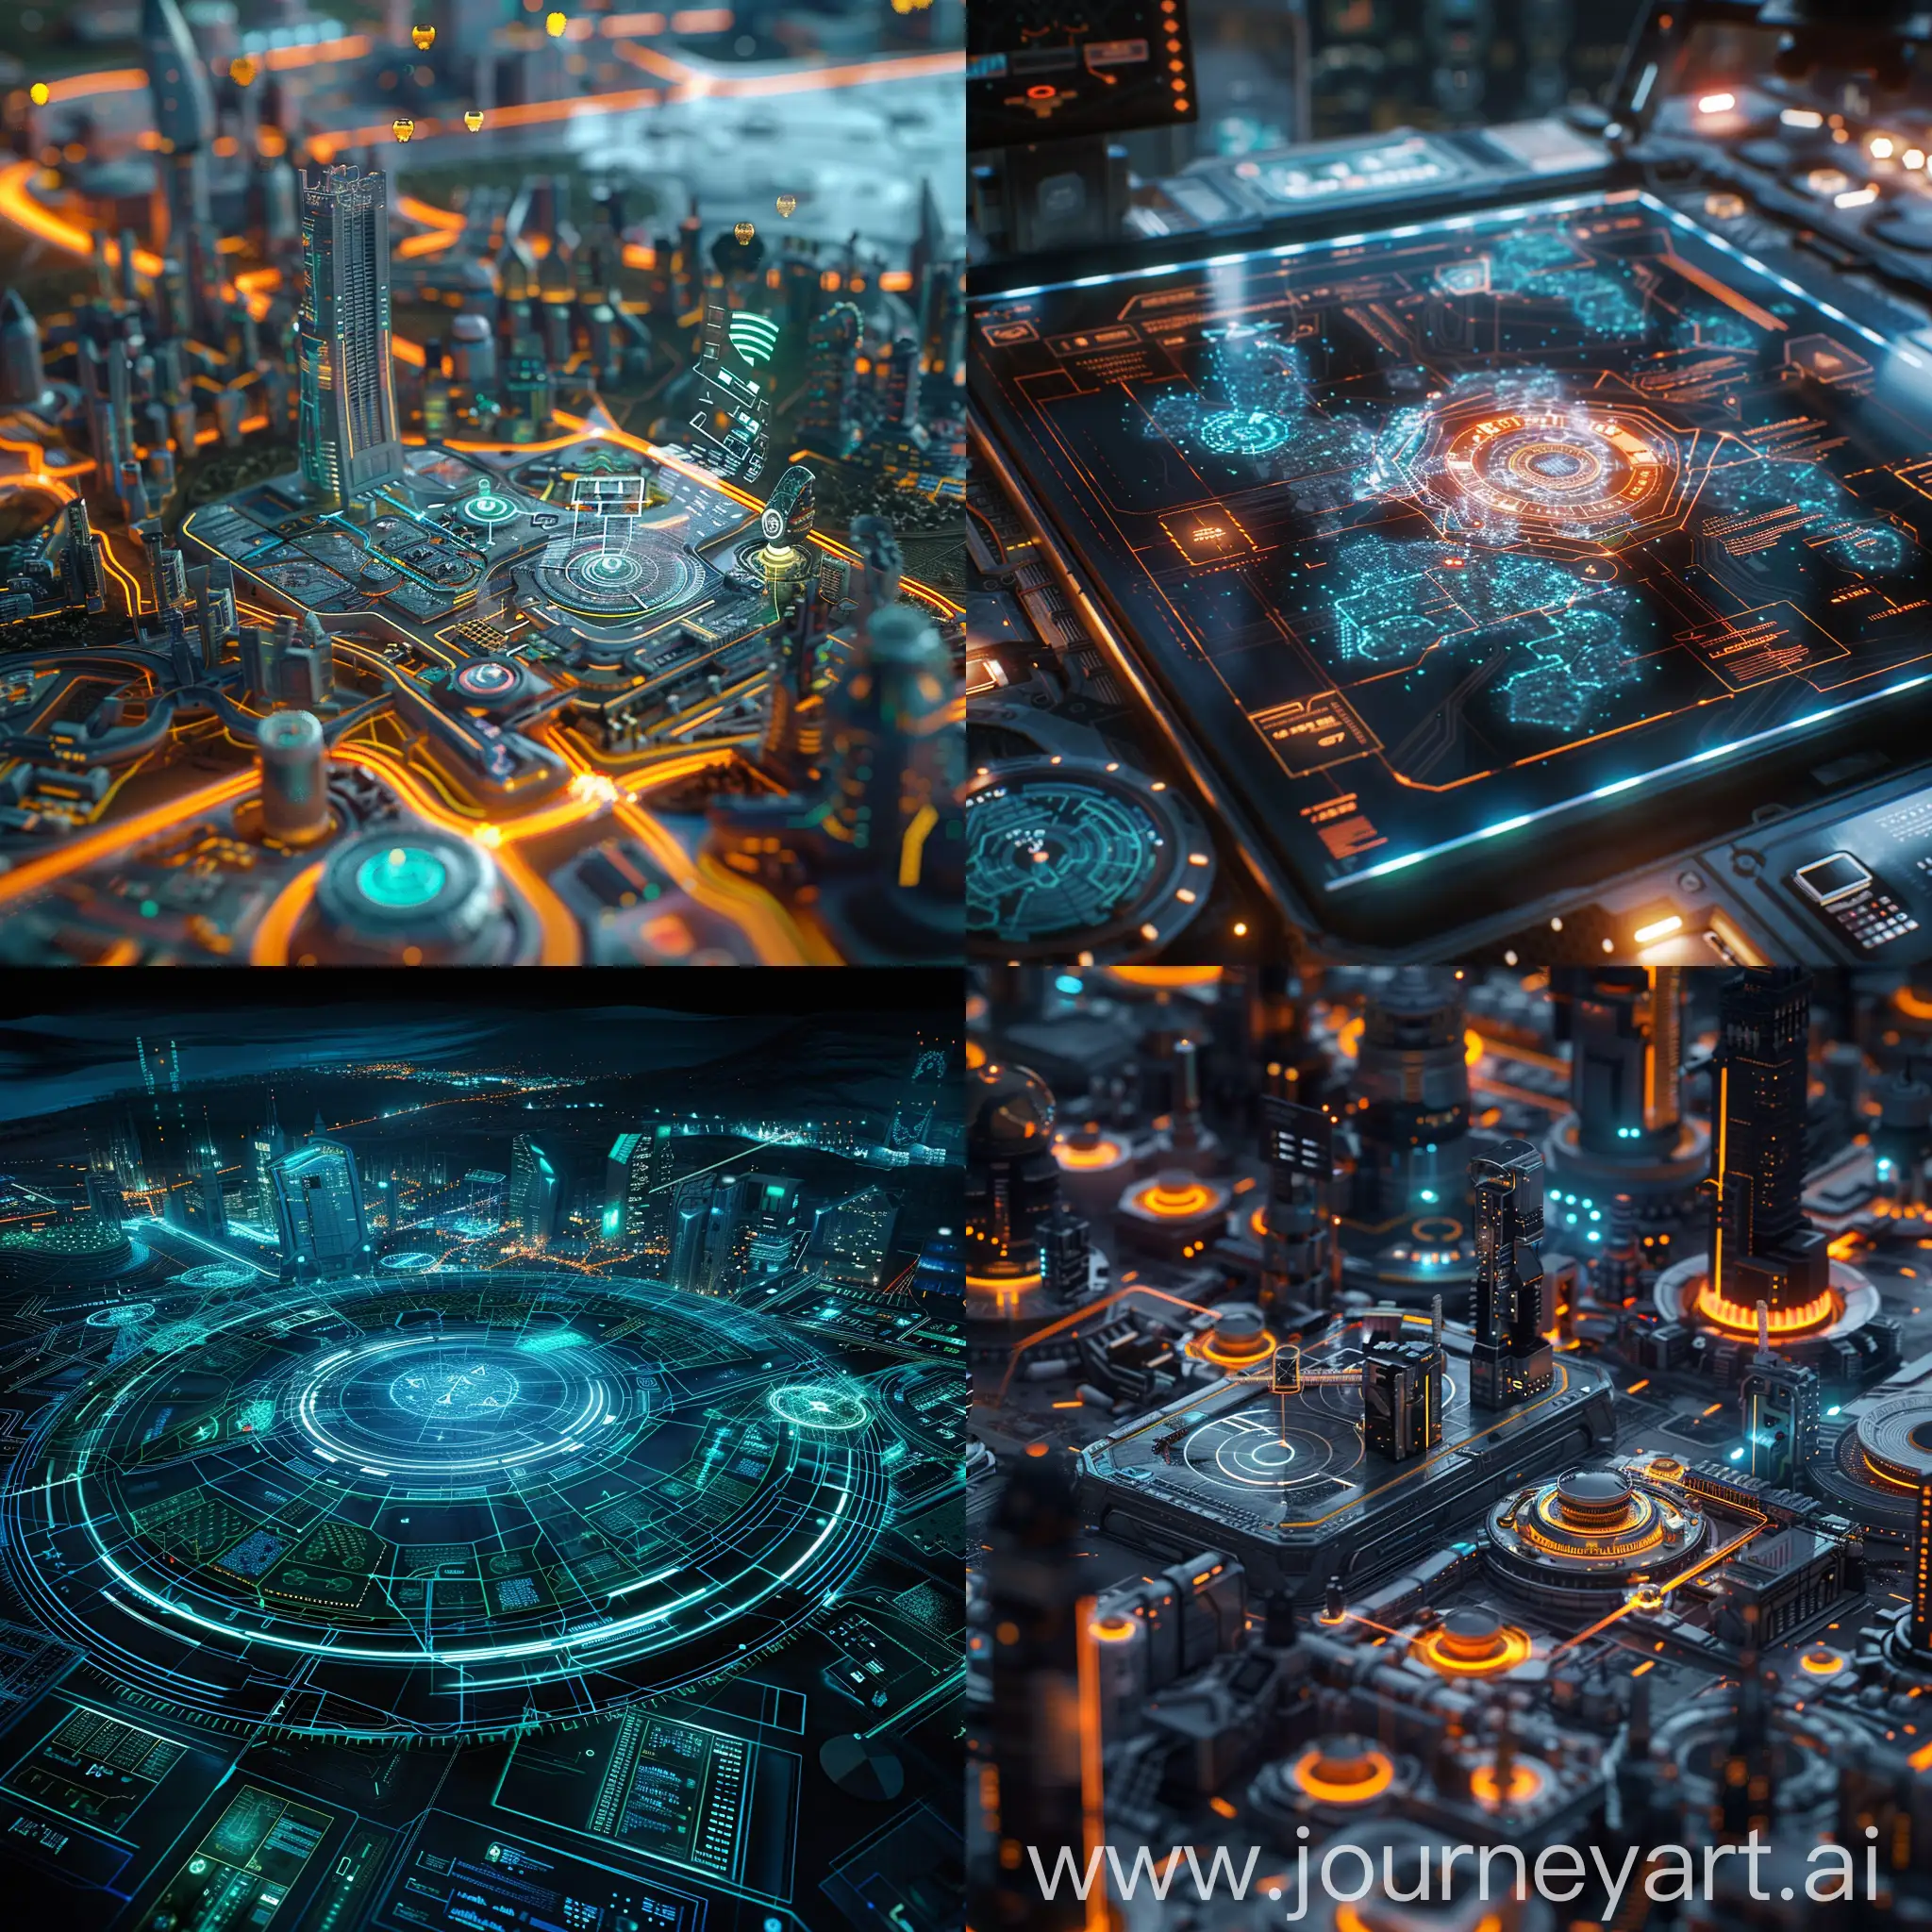 Futuristic-SciFi-Map-with-Advanced-AR-Technology-and-RealTime-Data-Streaming